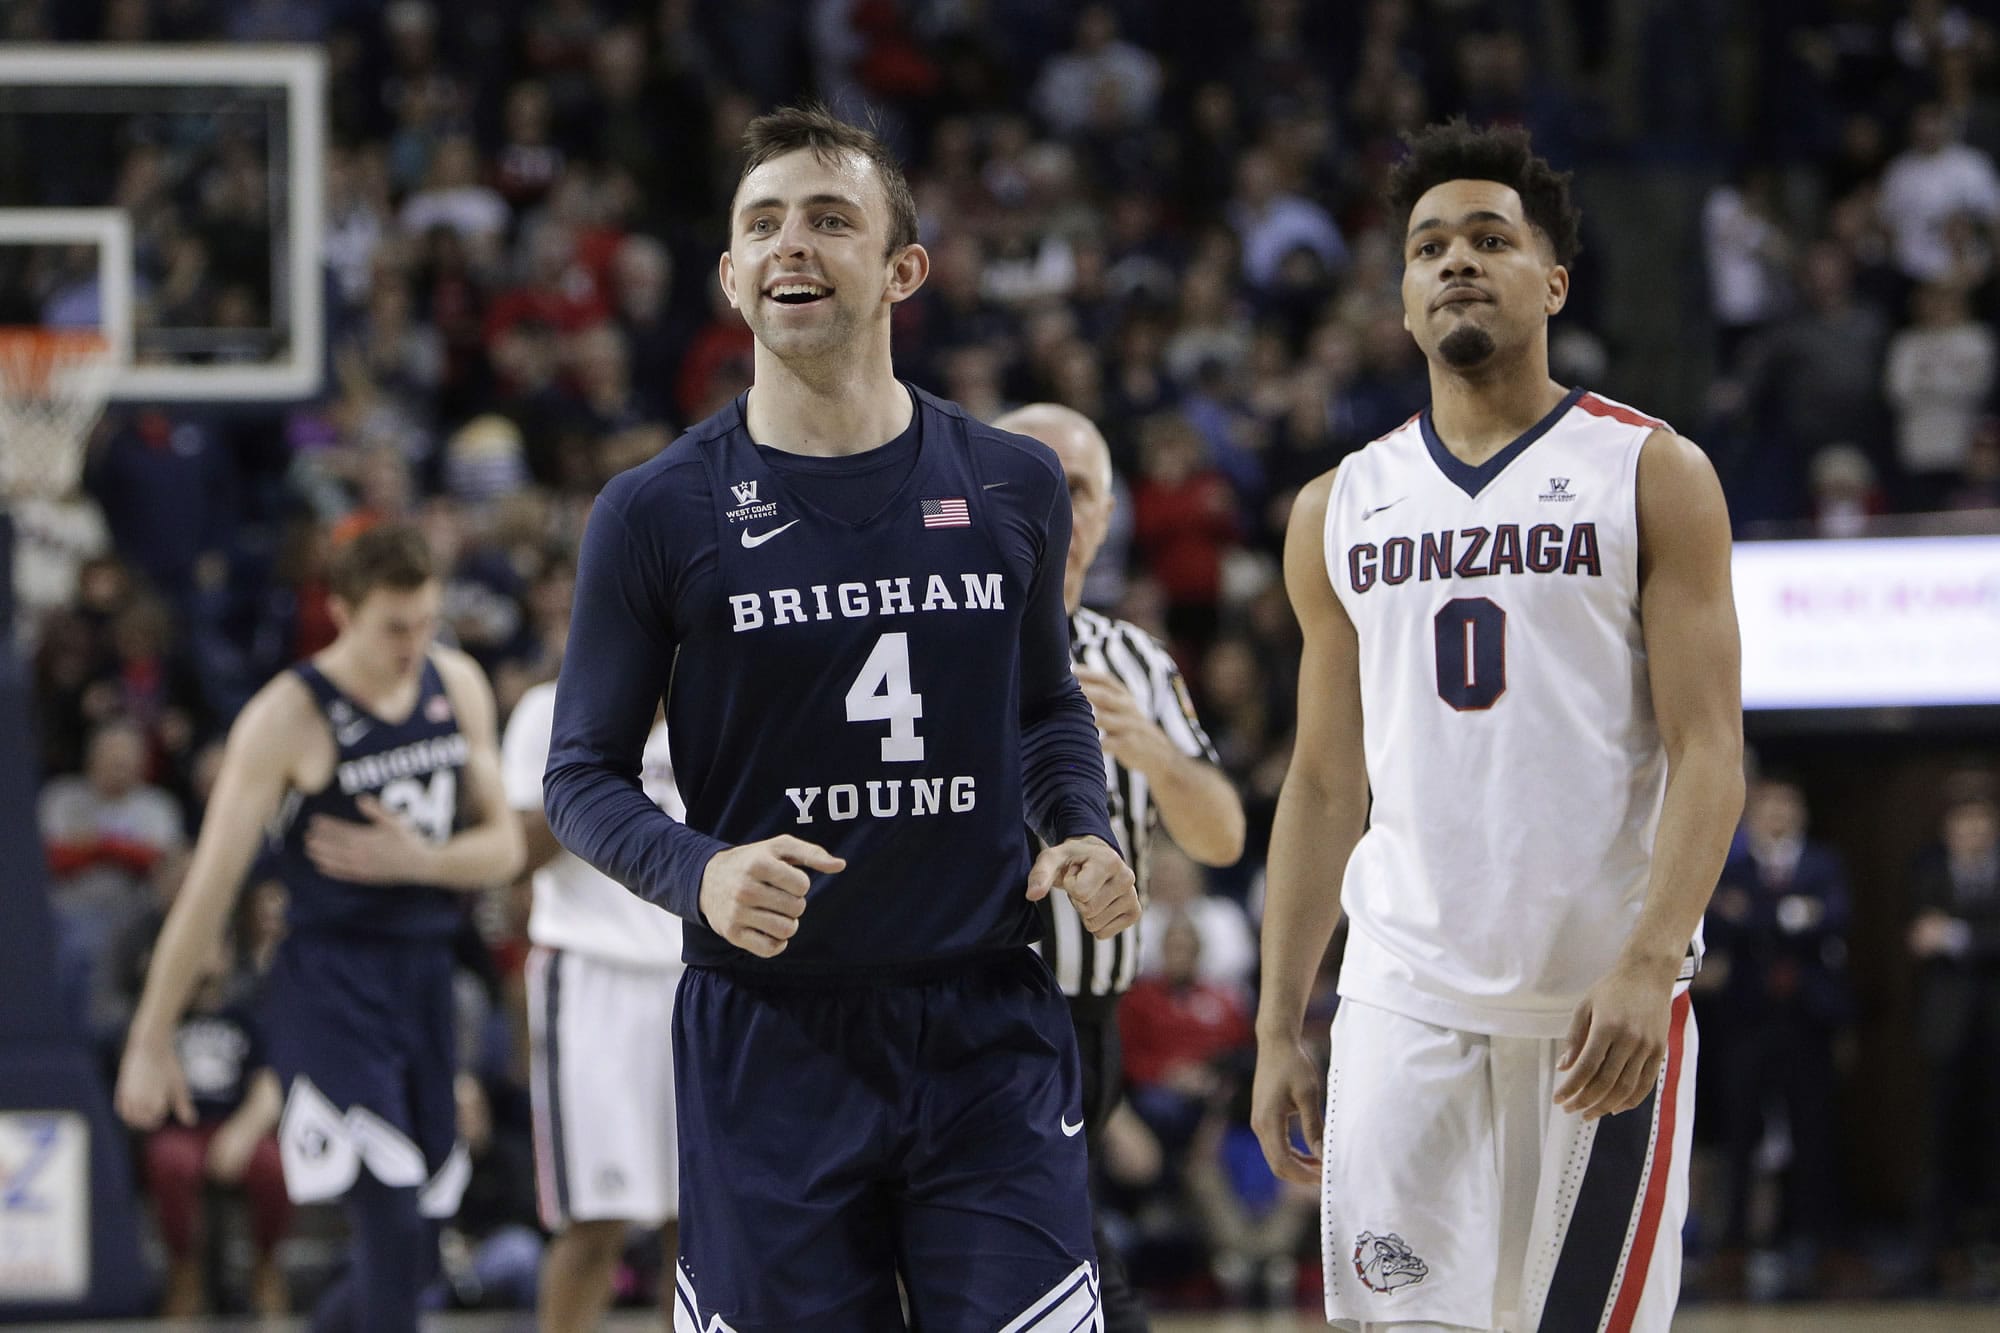 BYU guard Nick Emery (4) smiles near the end of the second half of the team's NCAA college basketball game against Gonzaga in Spokane, Wash., Saturday, Feb. 25, 2017. BYU won 79-71.